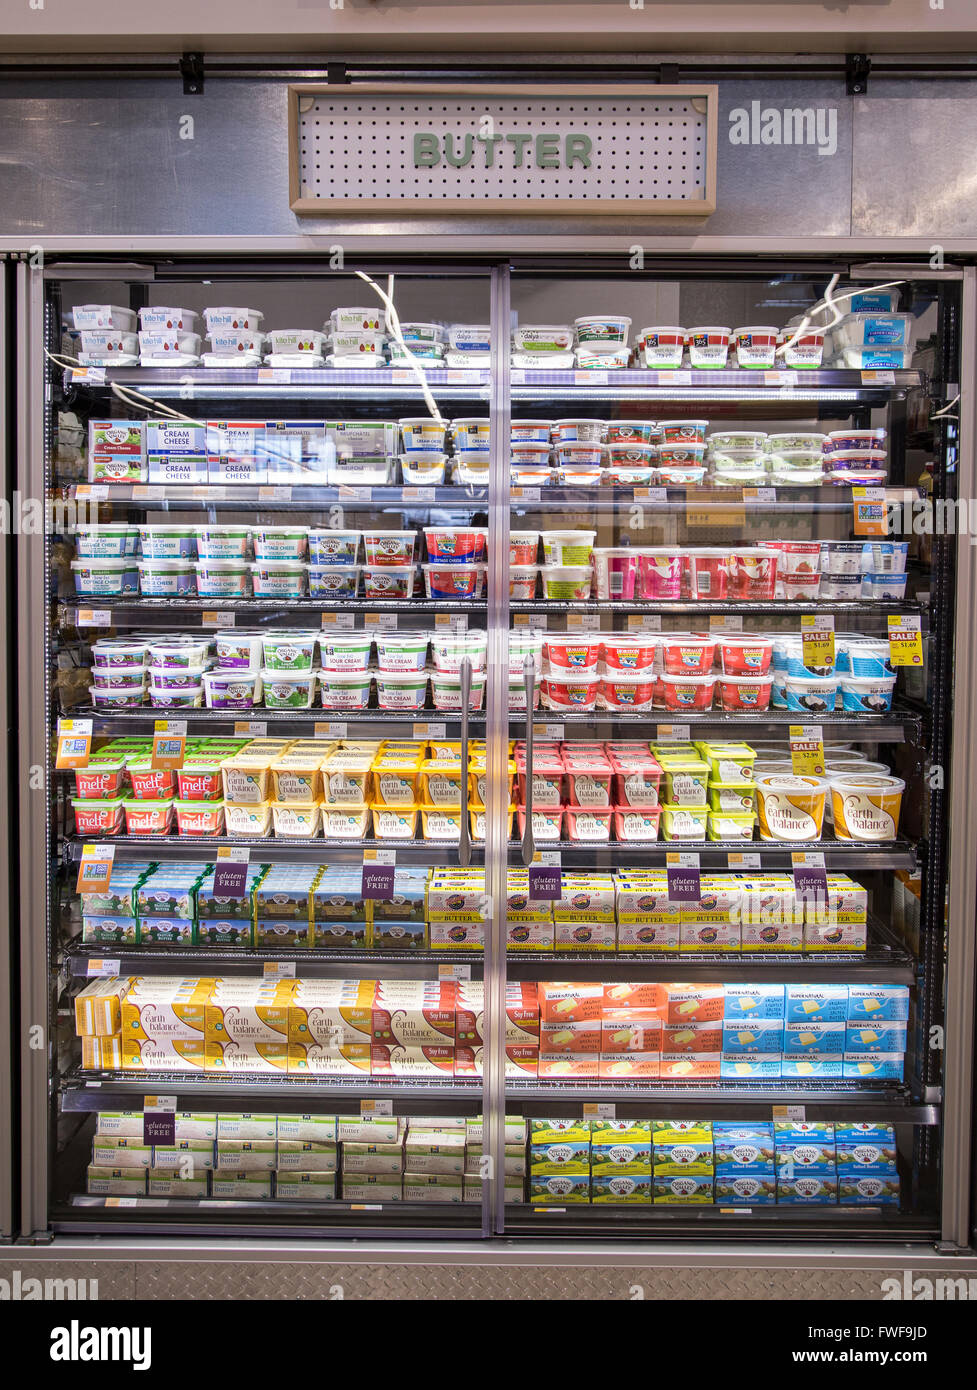 Butter displayed in a dairy refrigerator case at a grocery store Stock Photo